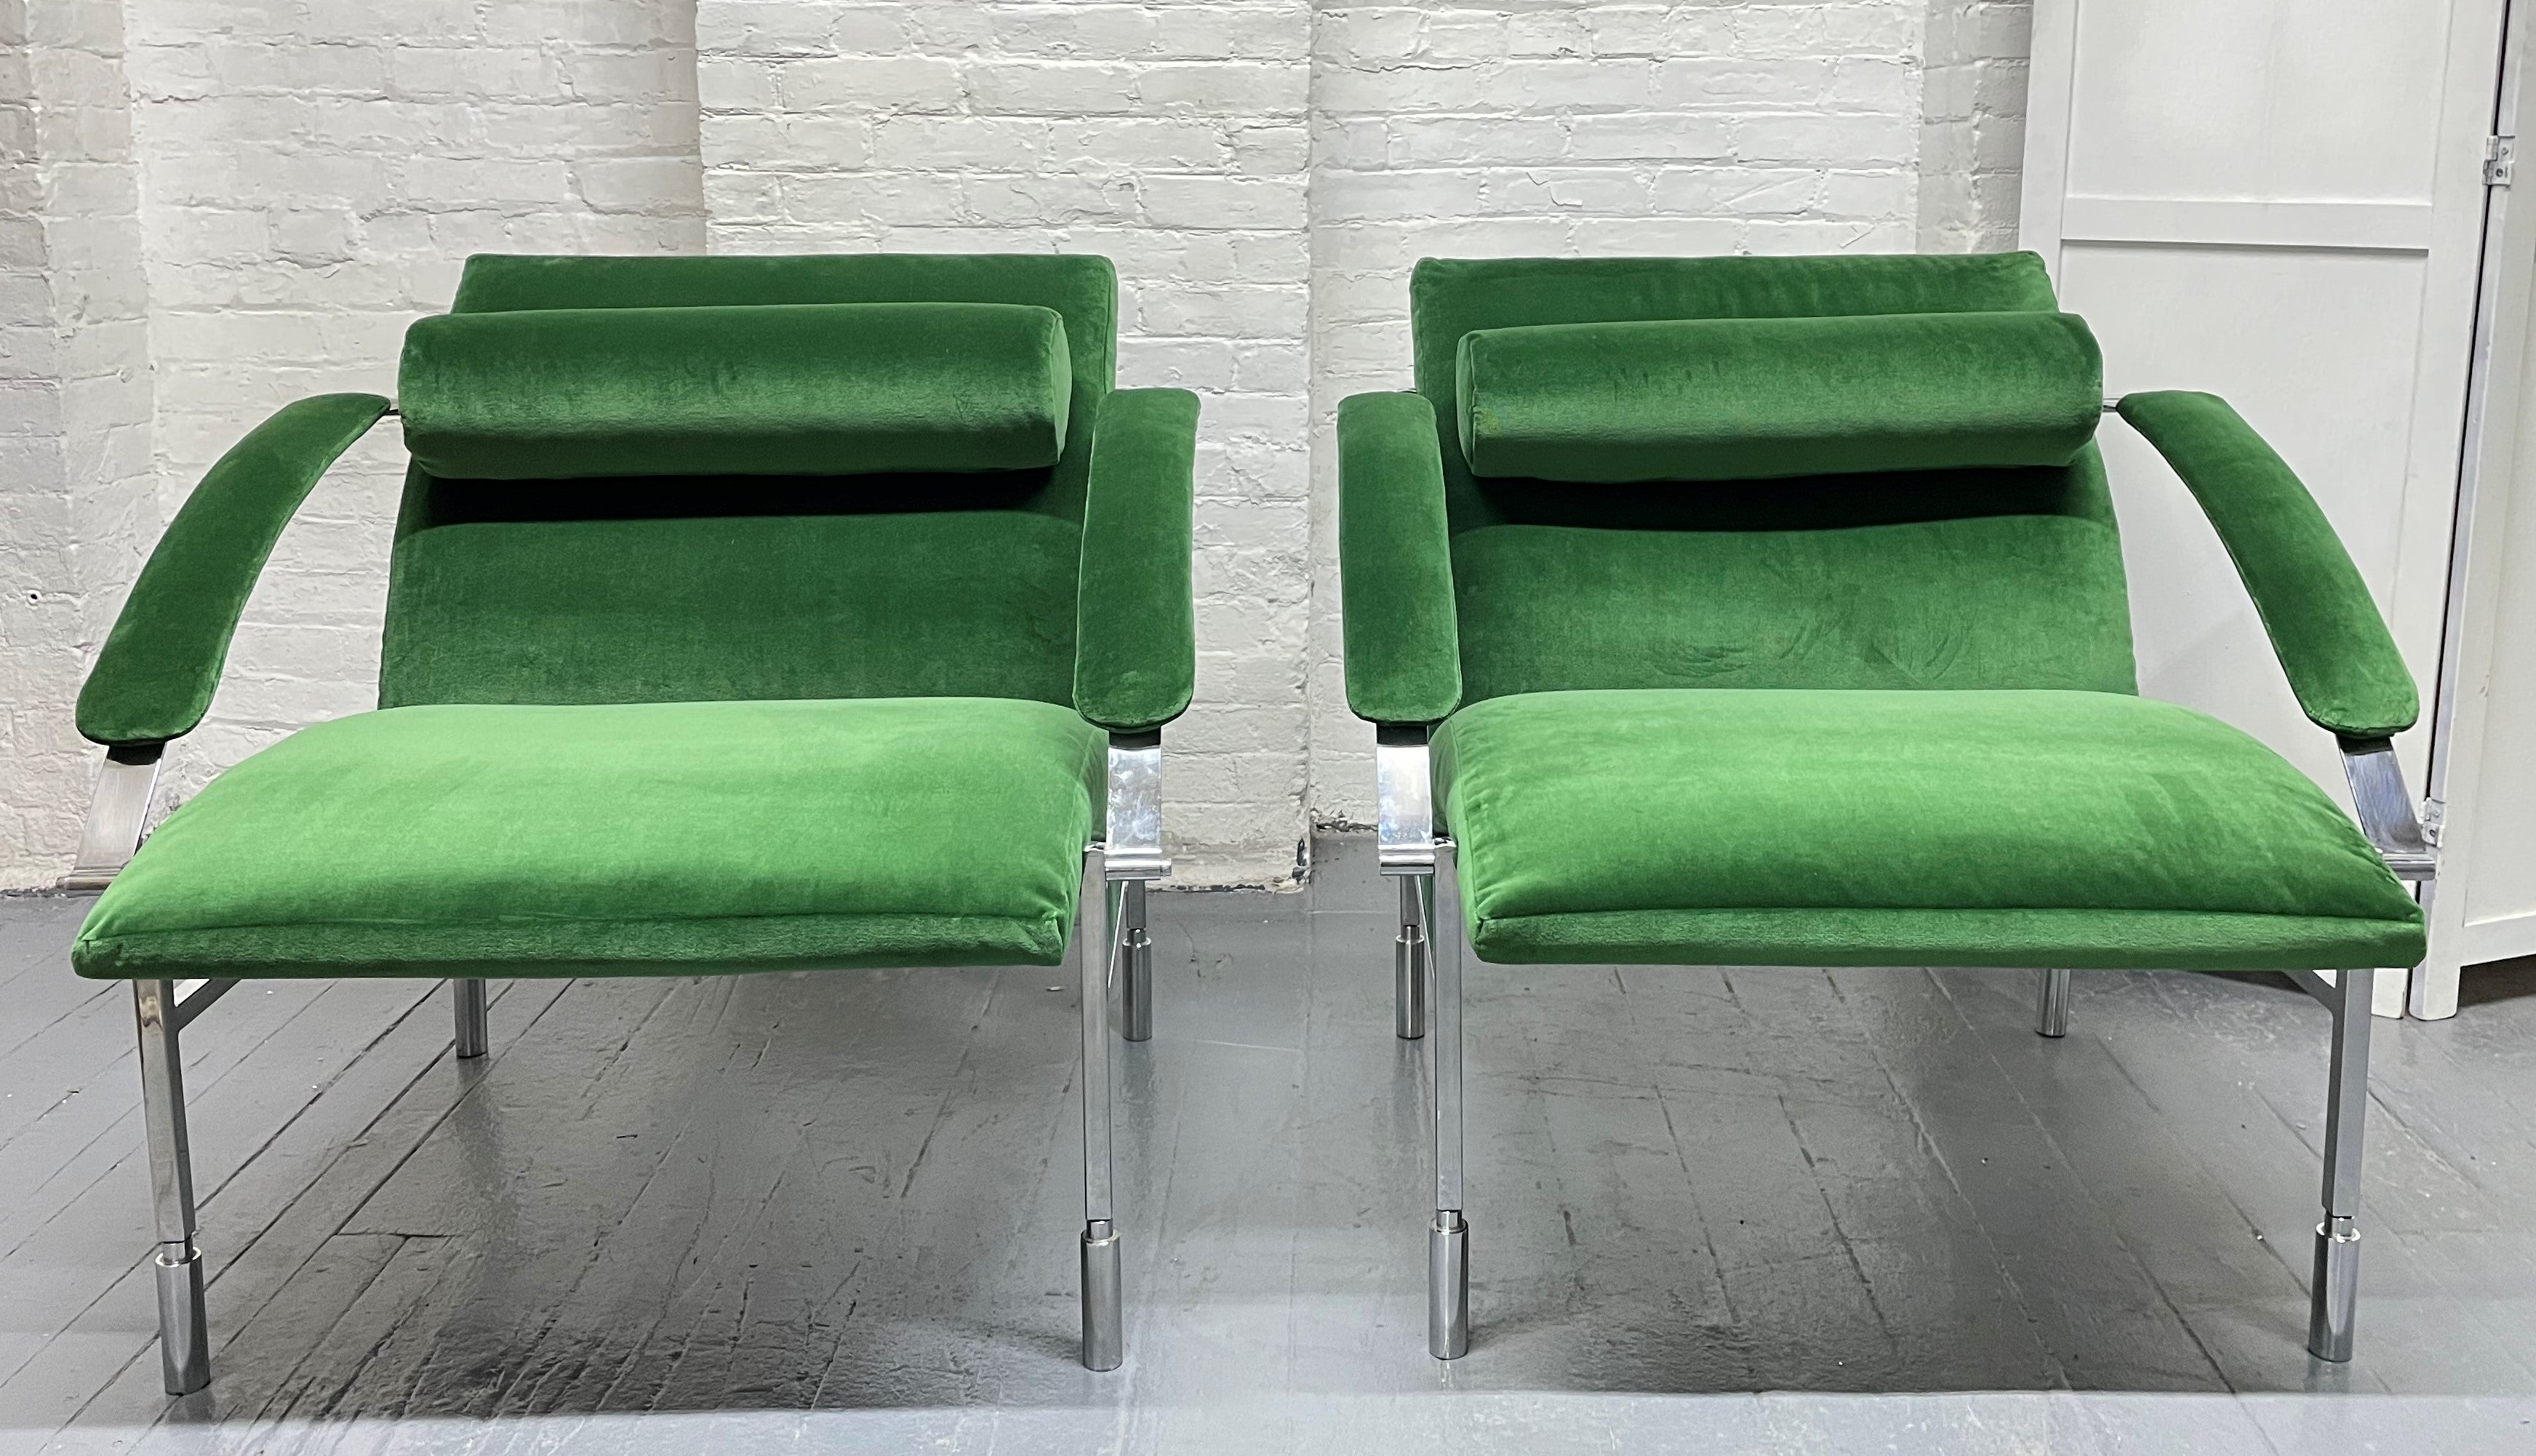 Pair of Italian chrome lounge chairs. The frame is steel and chrome-plated, has a detachable headrest and upholstered in green velvet.